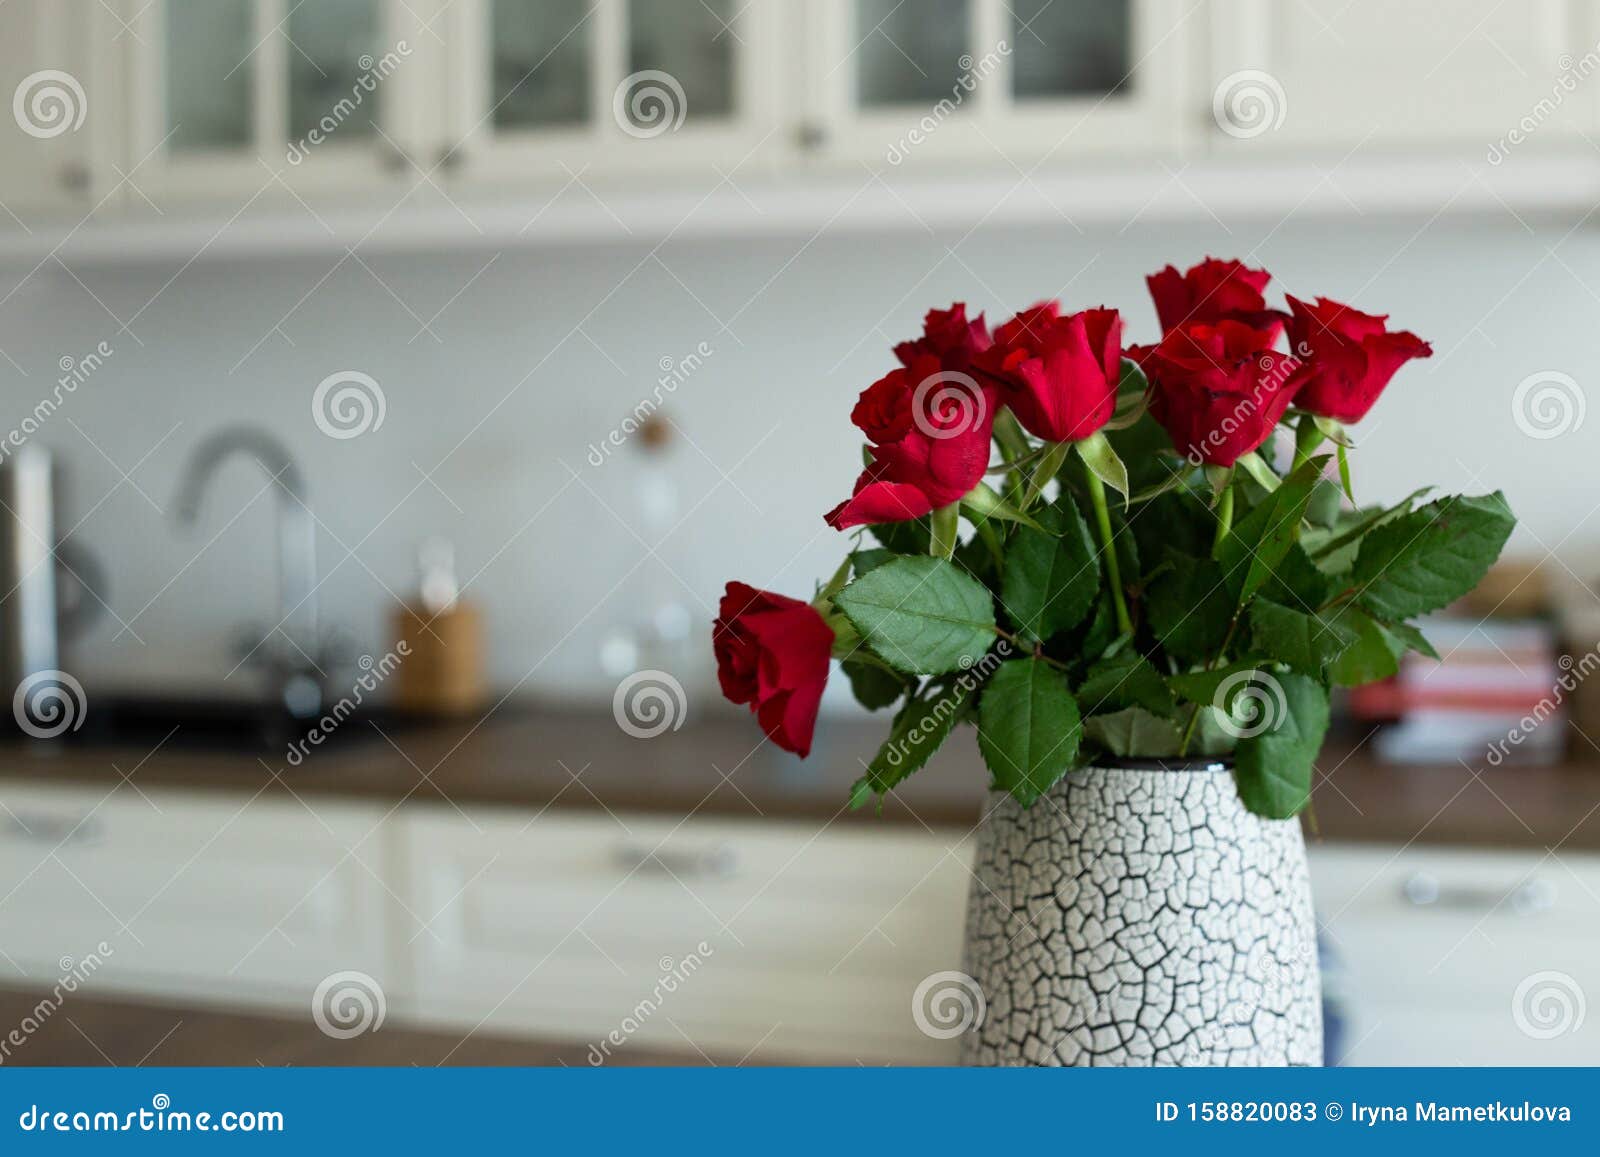 red roses kitchen table